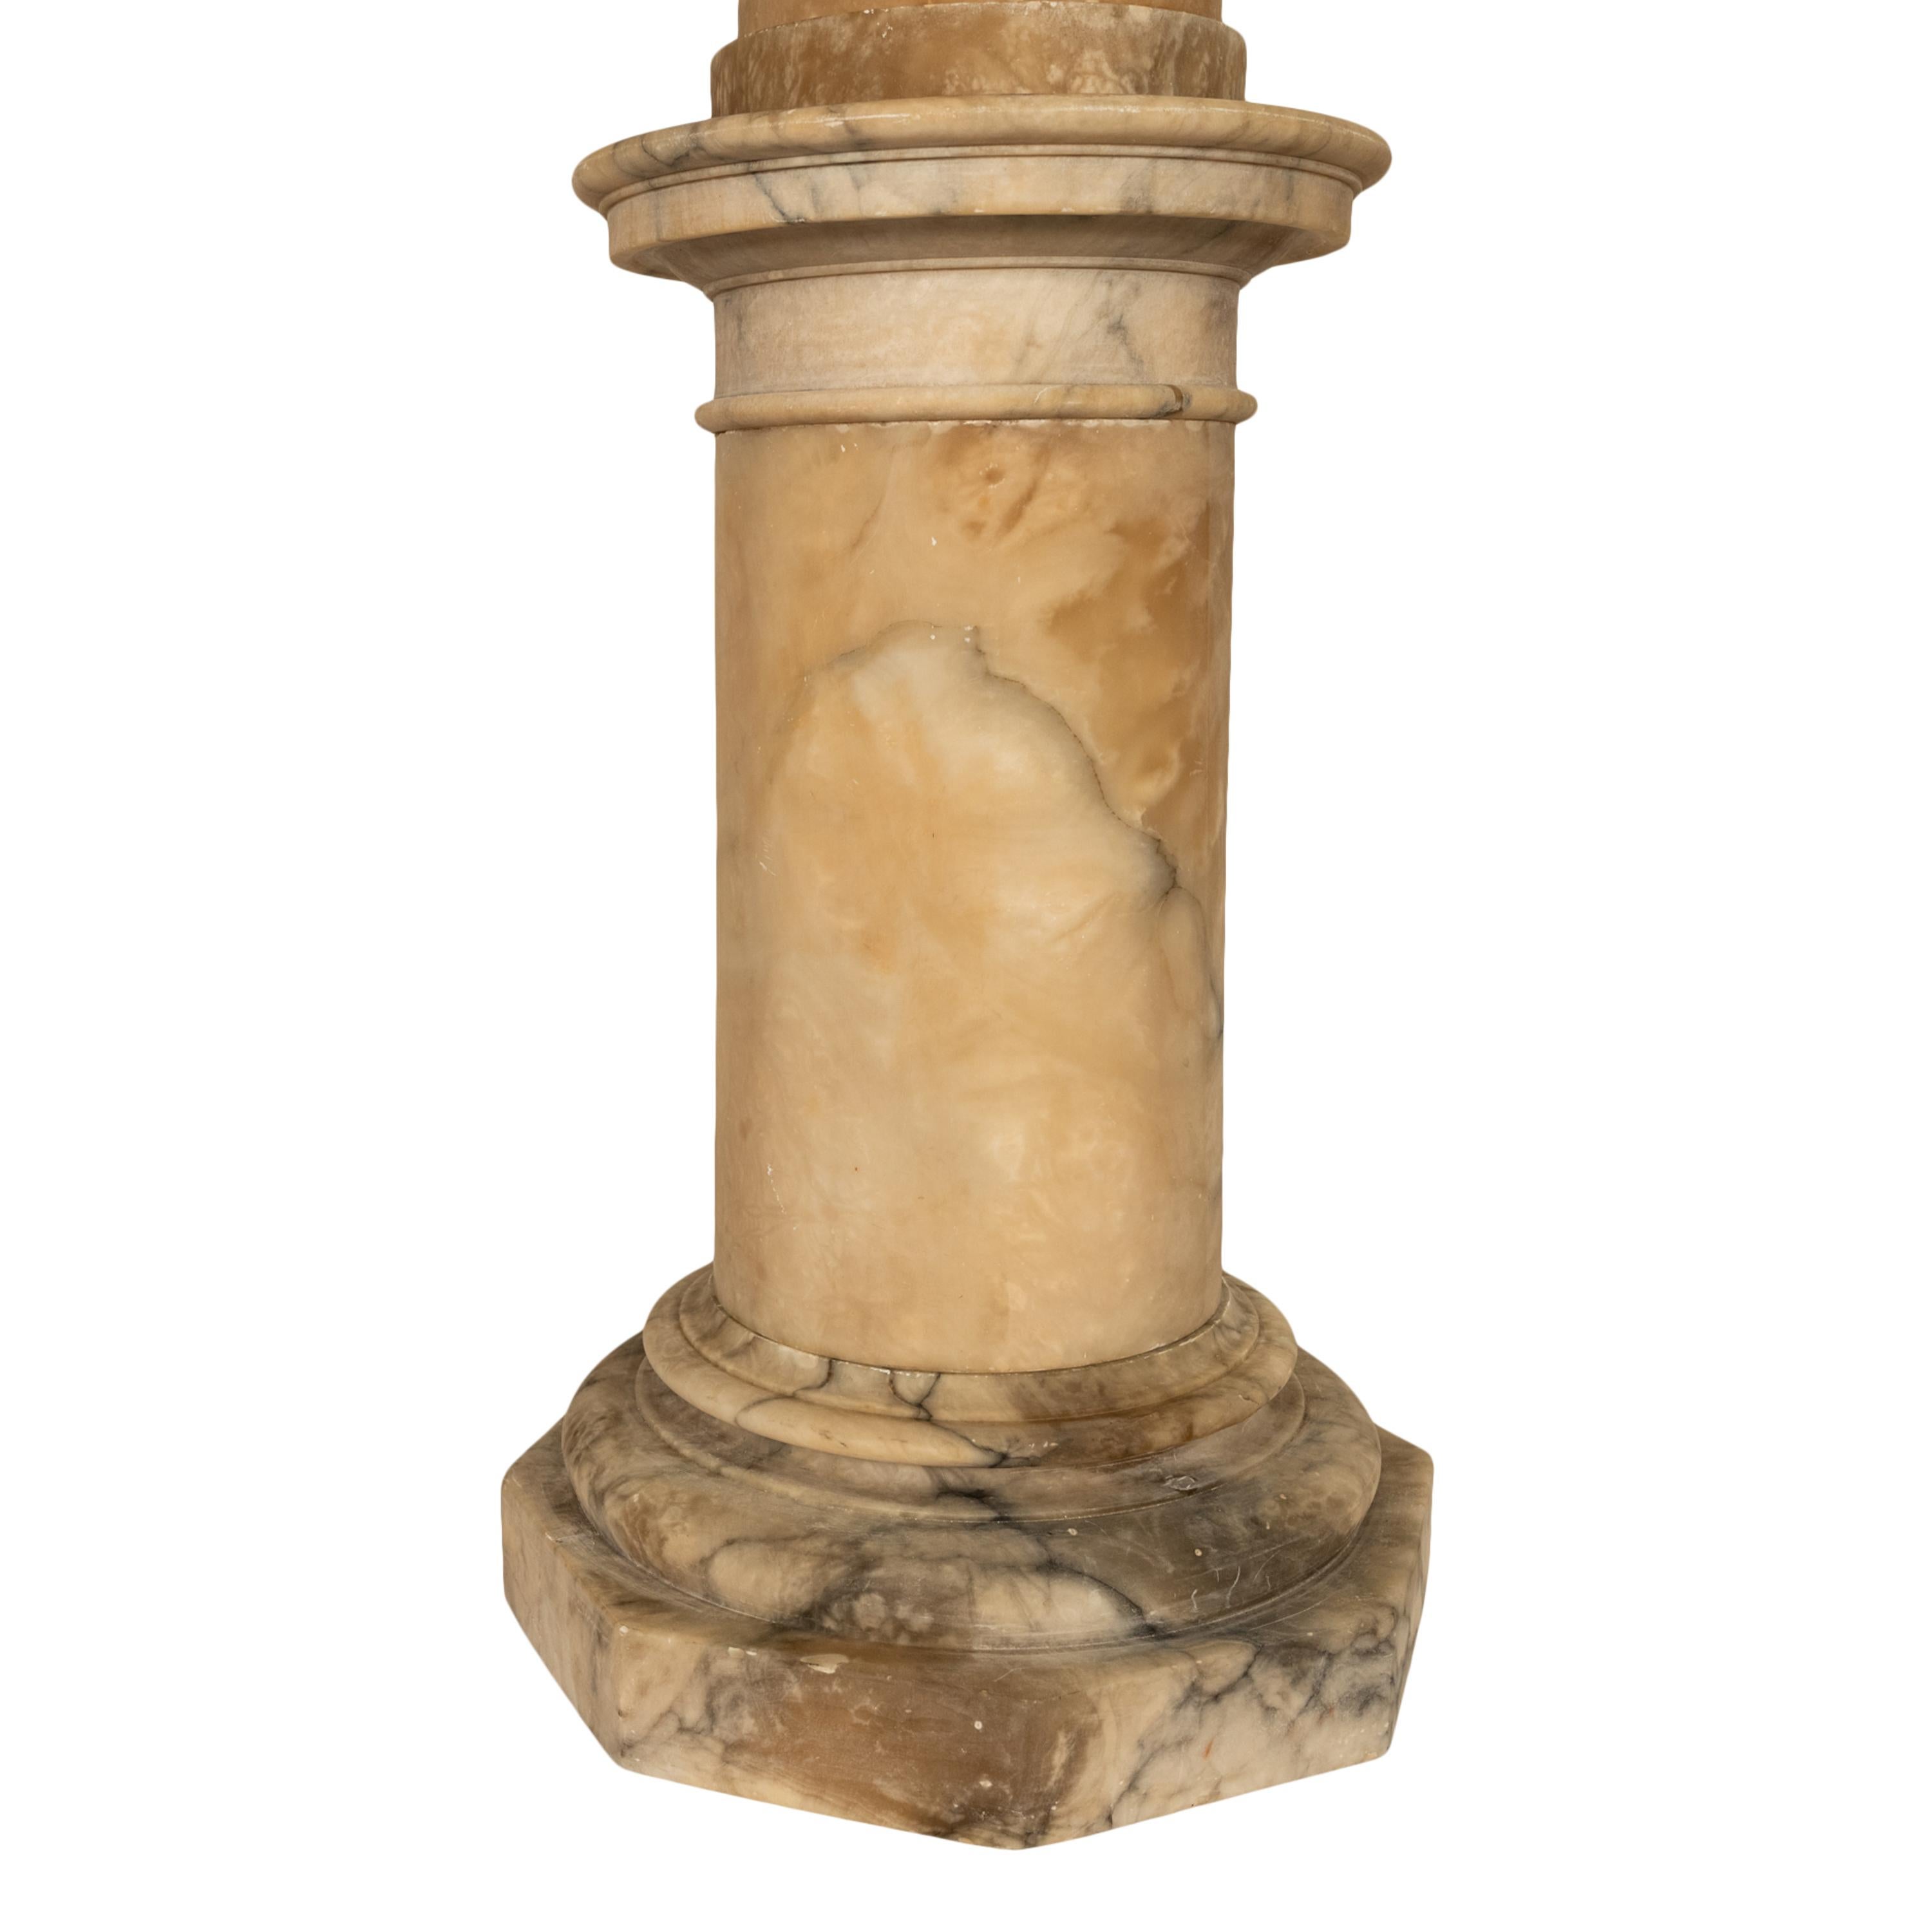 Antique 19th Century Italian Carved Alabaster Neoclassical Urn on Pedestal 1850 For Sale 16